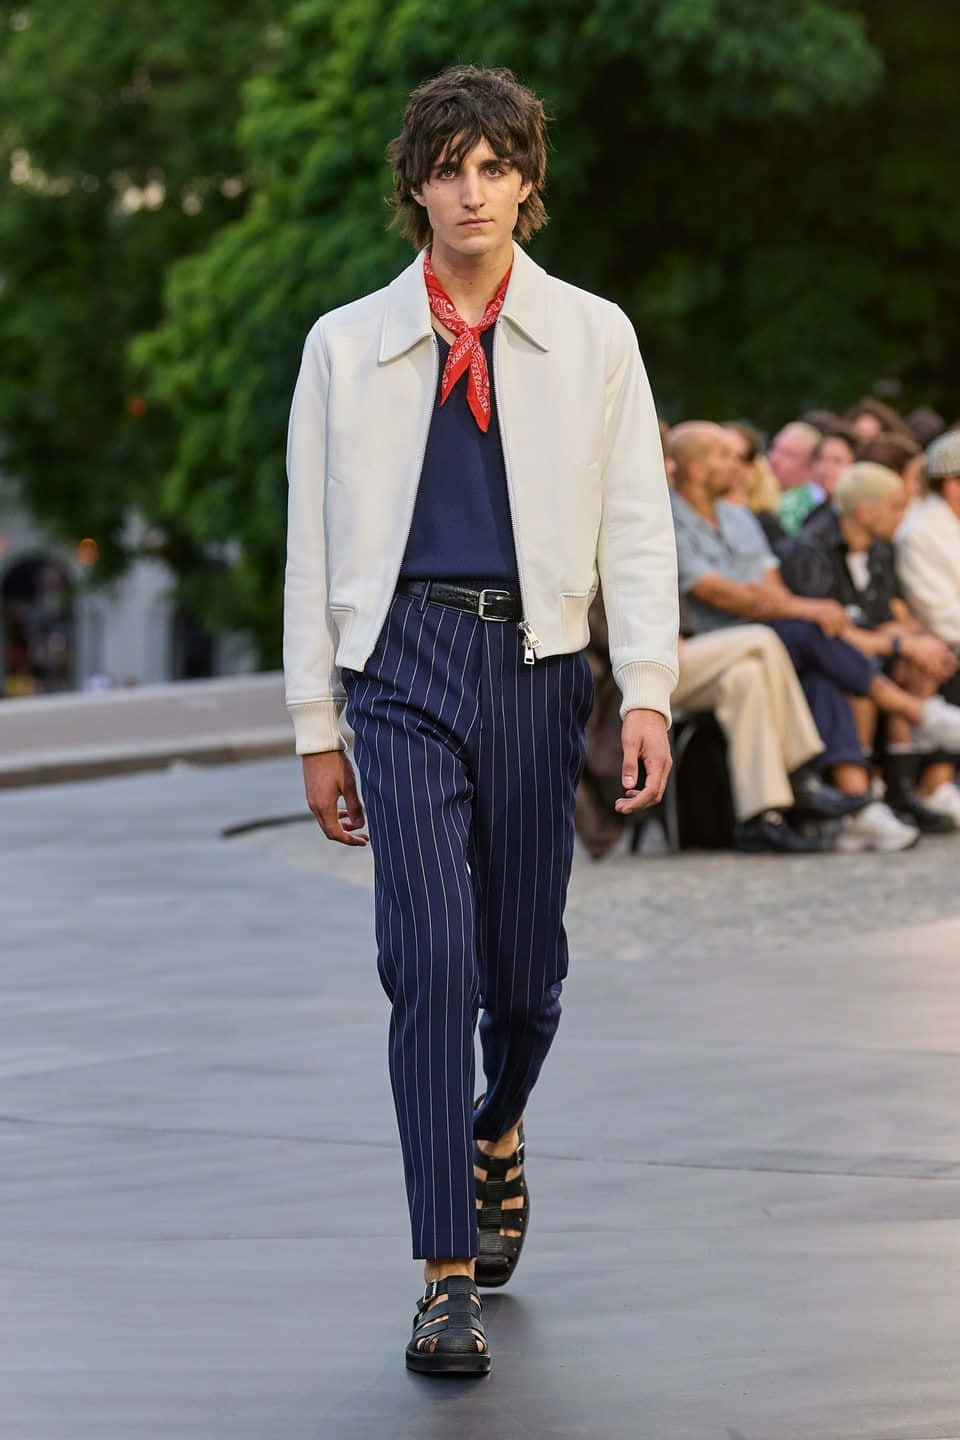 Download A Man In A White Jacket And Striped Pants Walks Down The ...